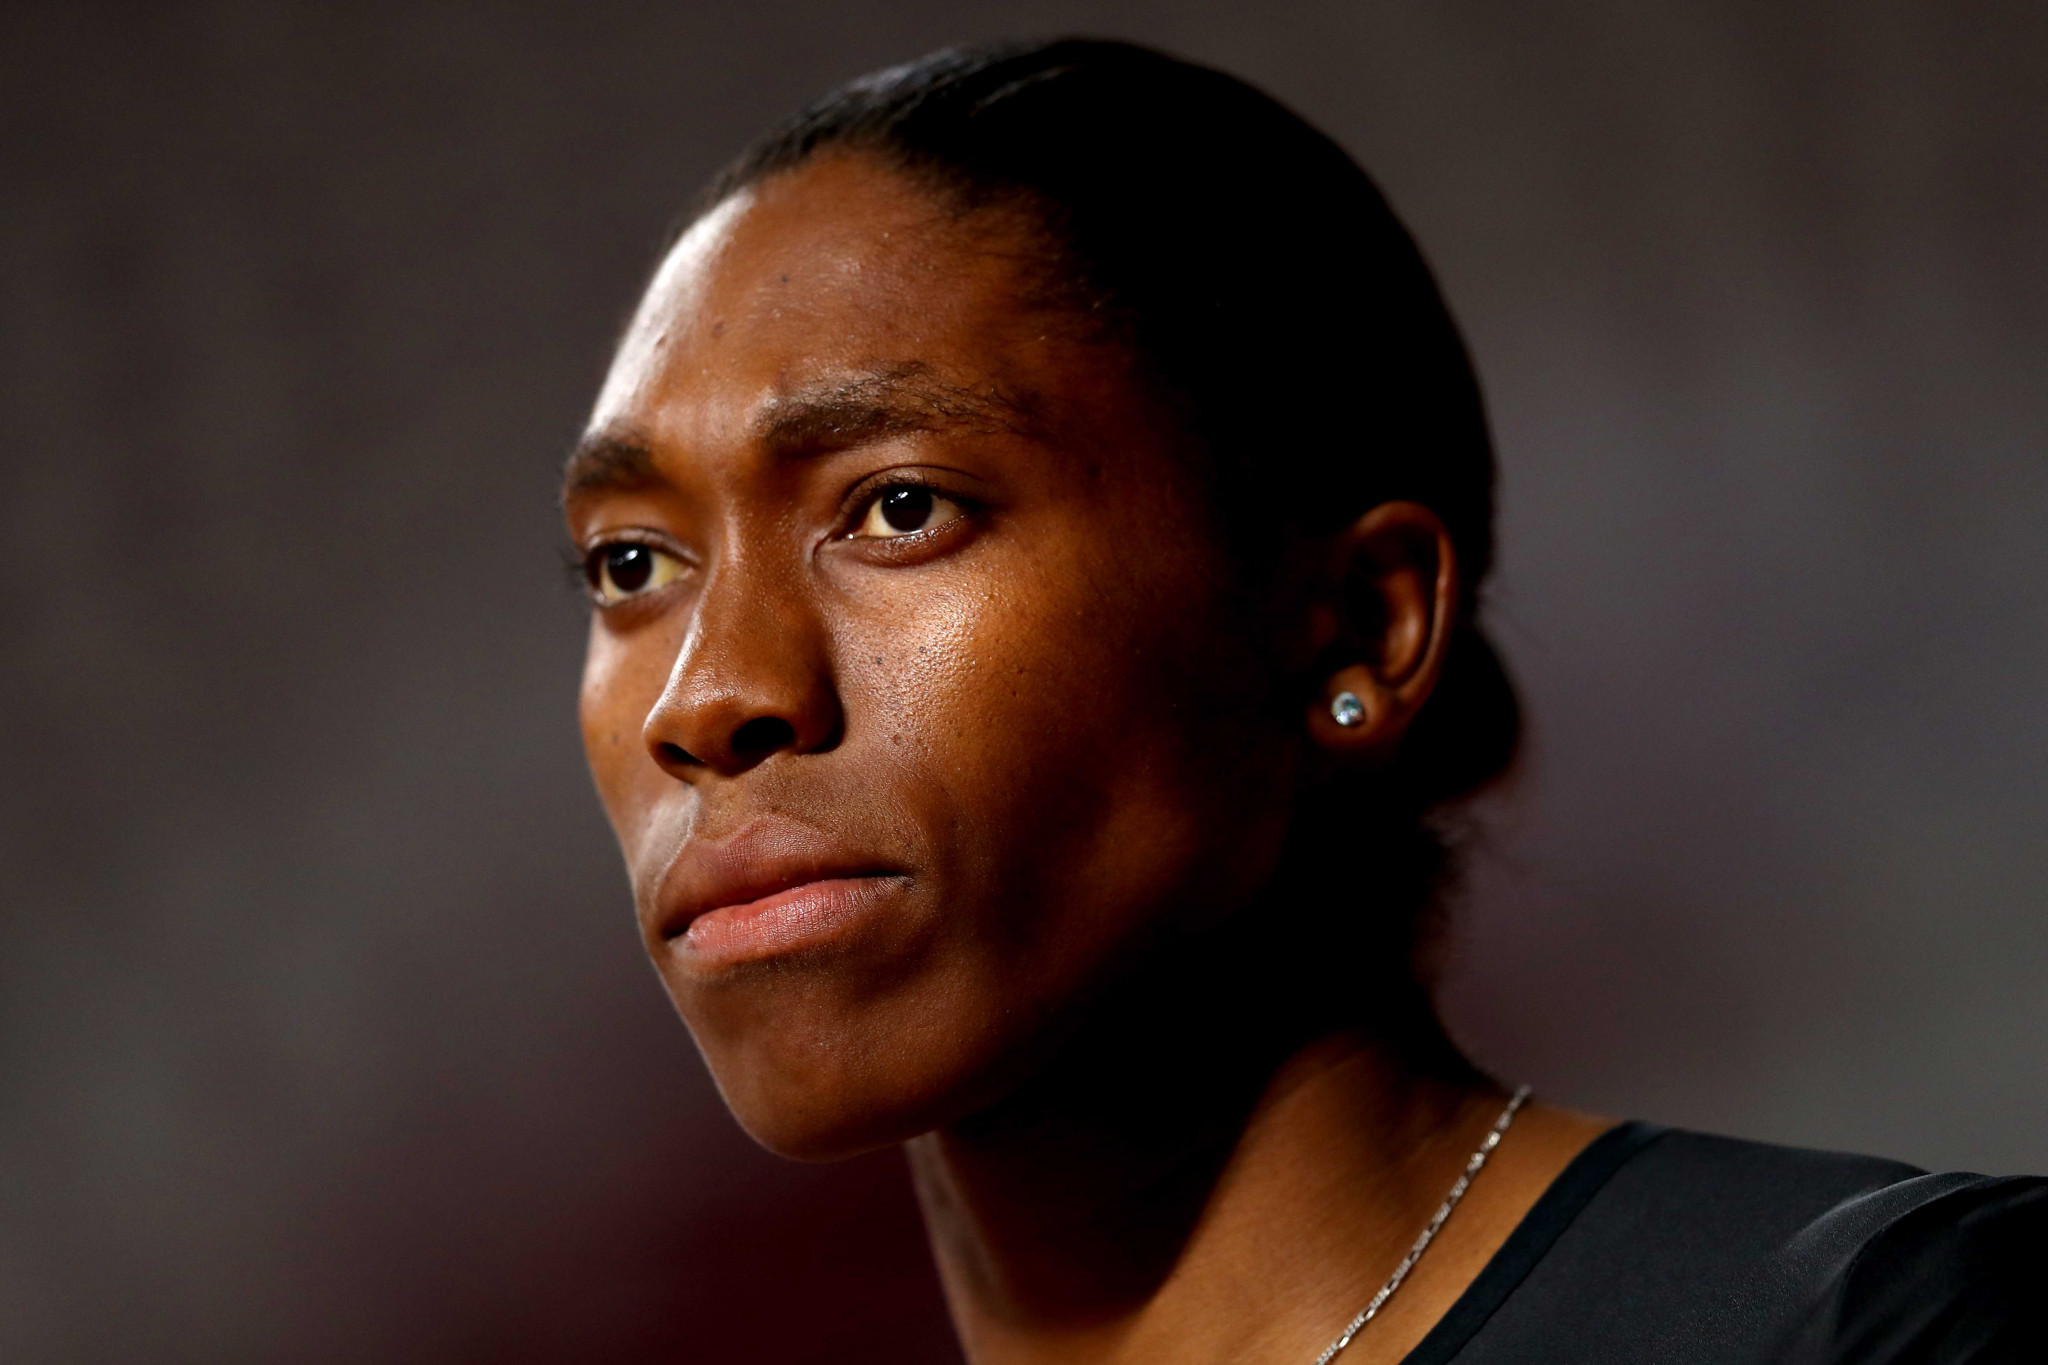 Athletics South Africa to appeal Semenya testosterone ruling